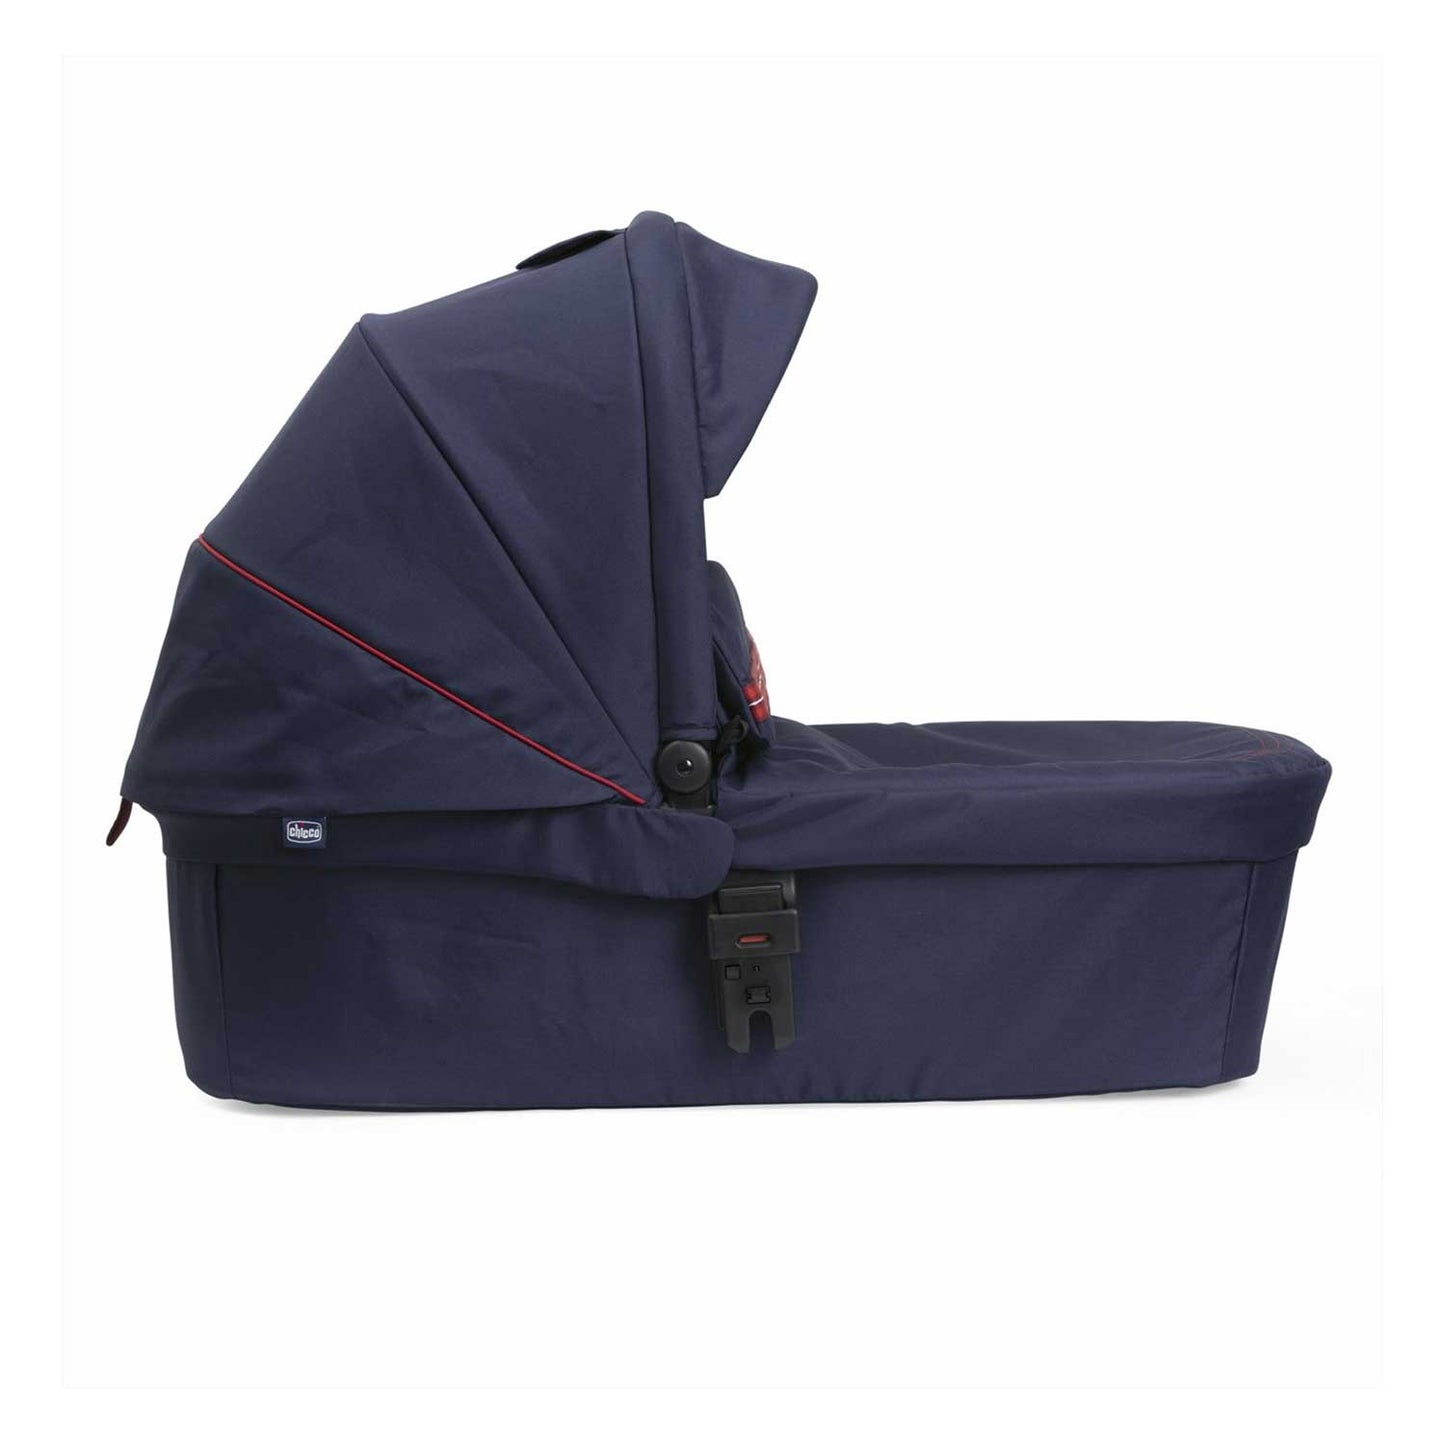 Chicco - Trio Seety Con Kory Essential Isize